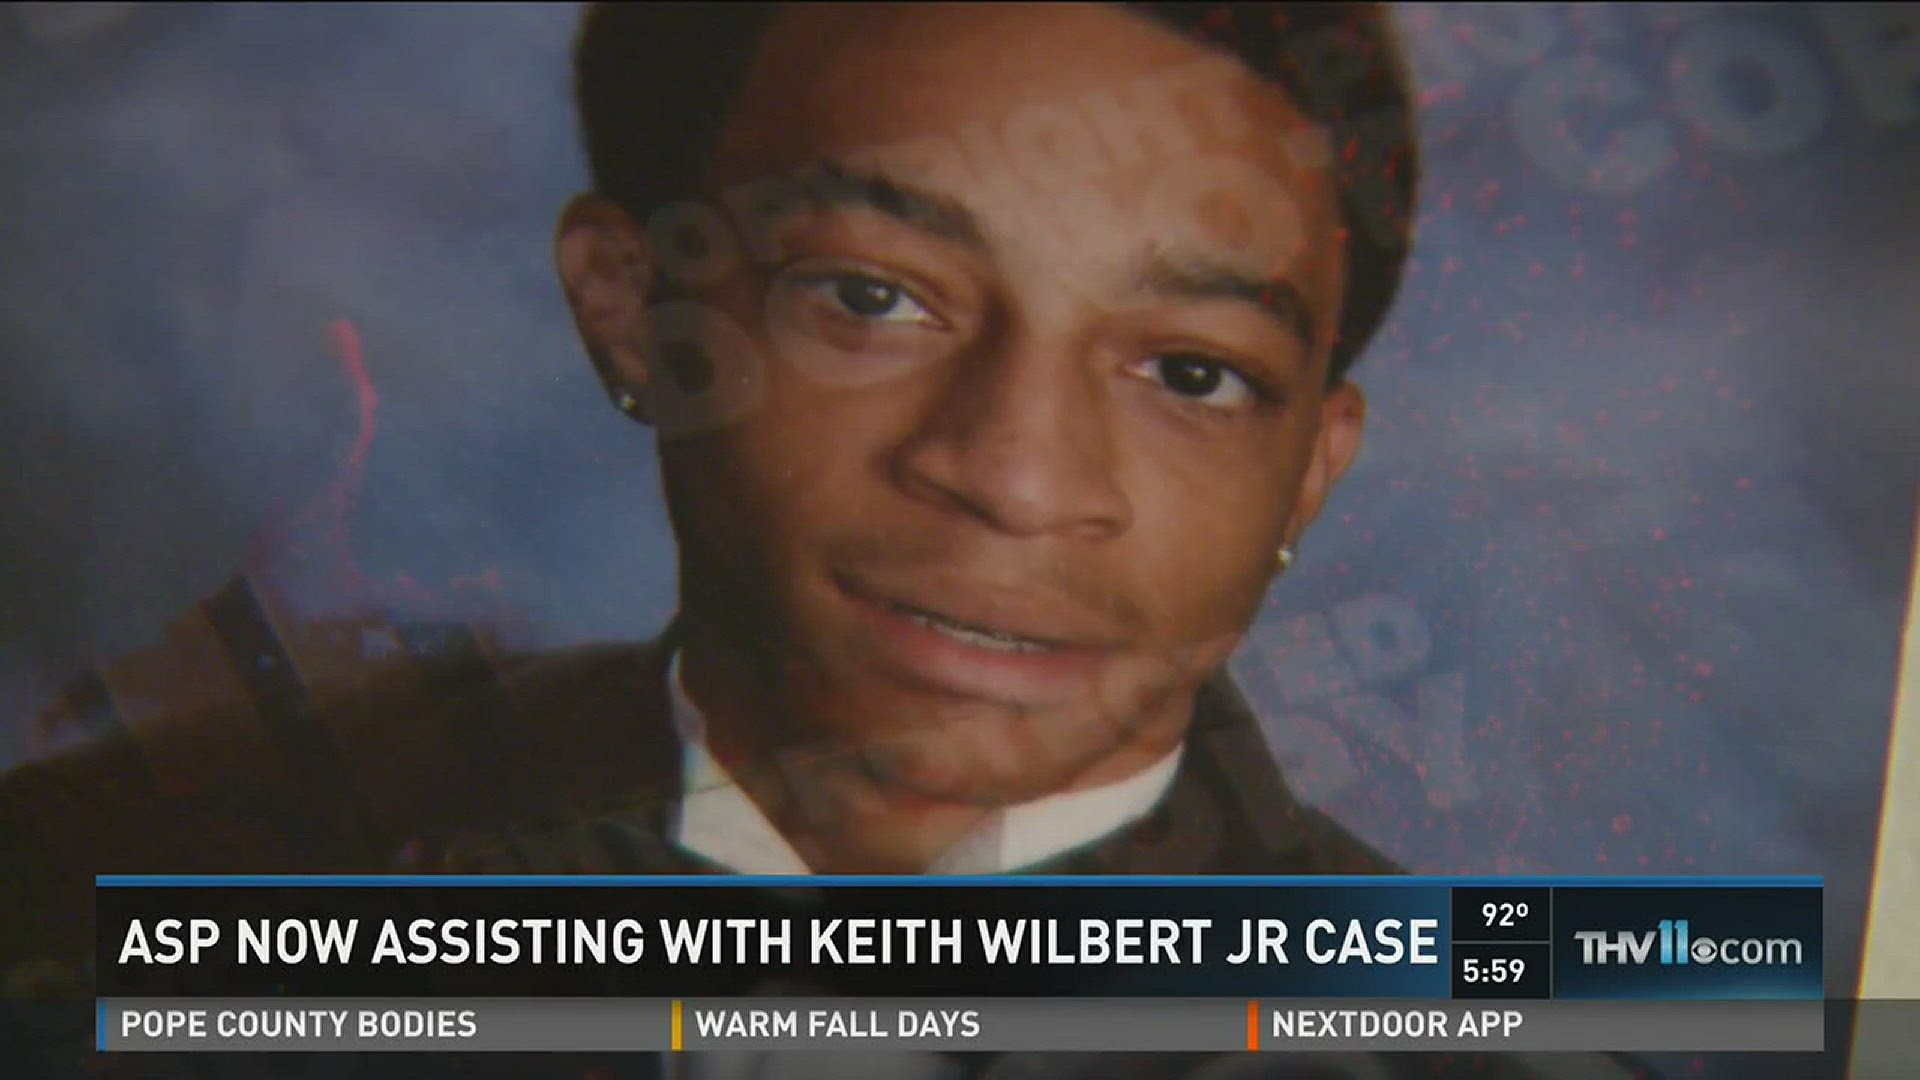 Ark. State Police now assisting with Keith Wilbert Jr. case